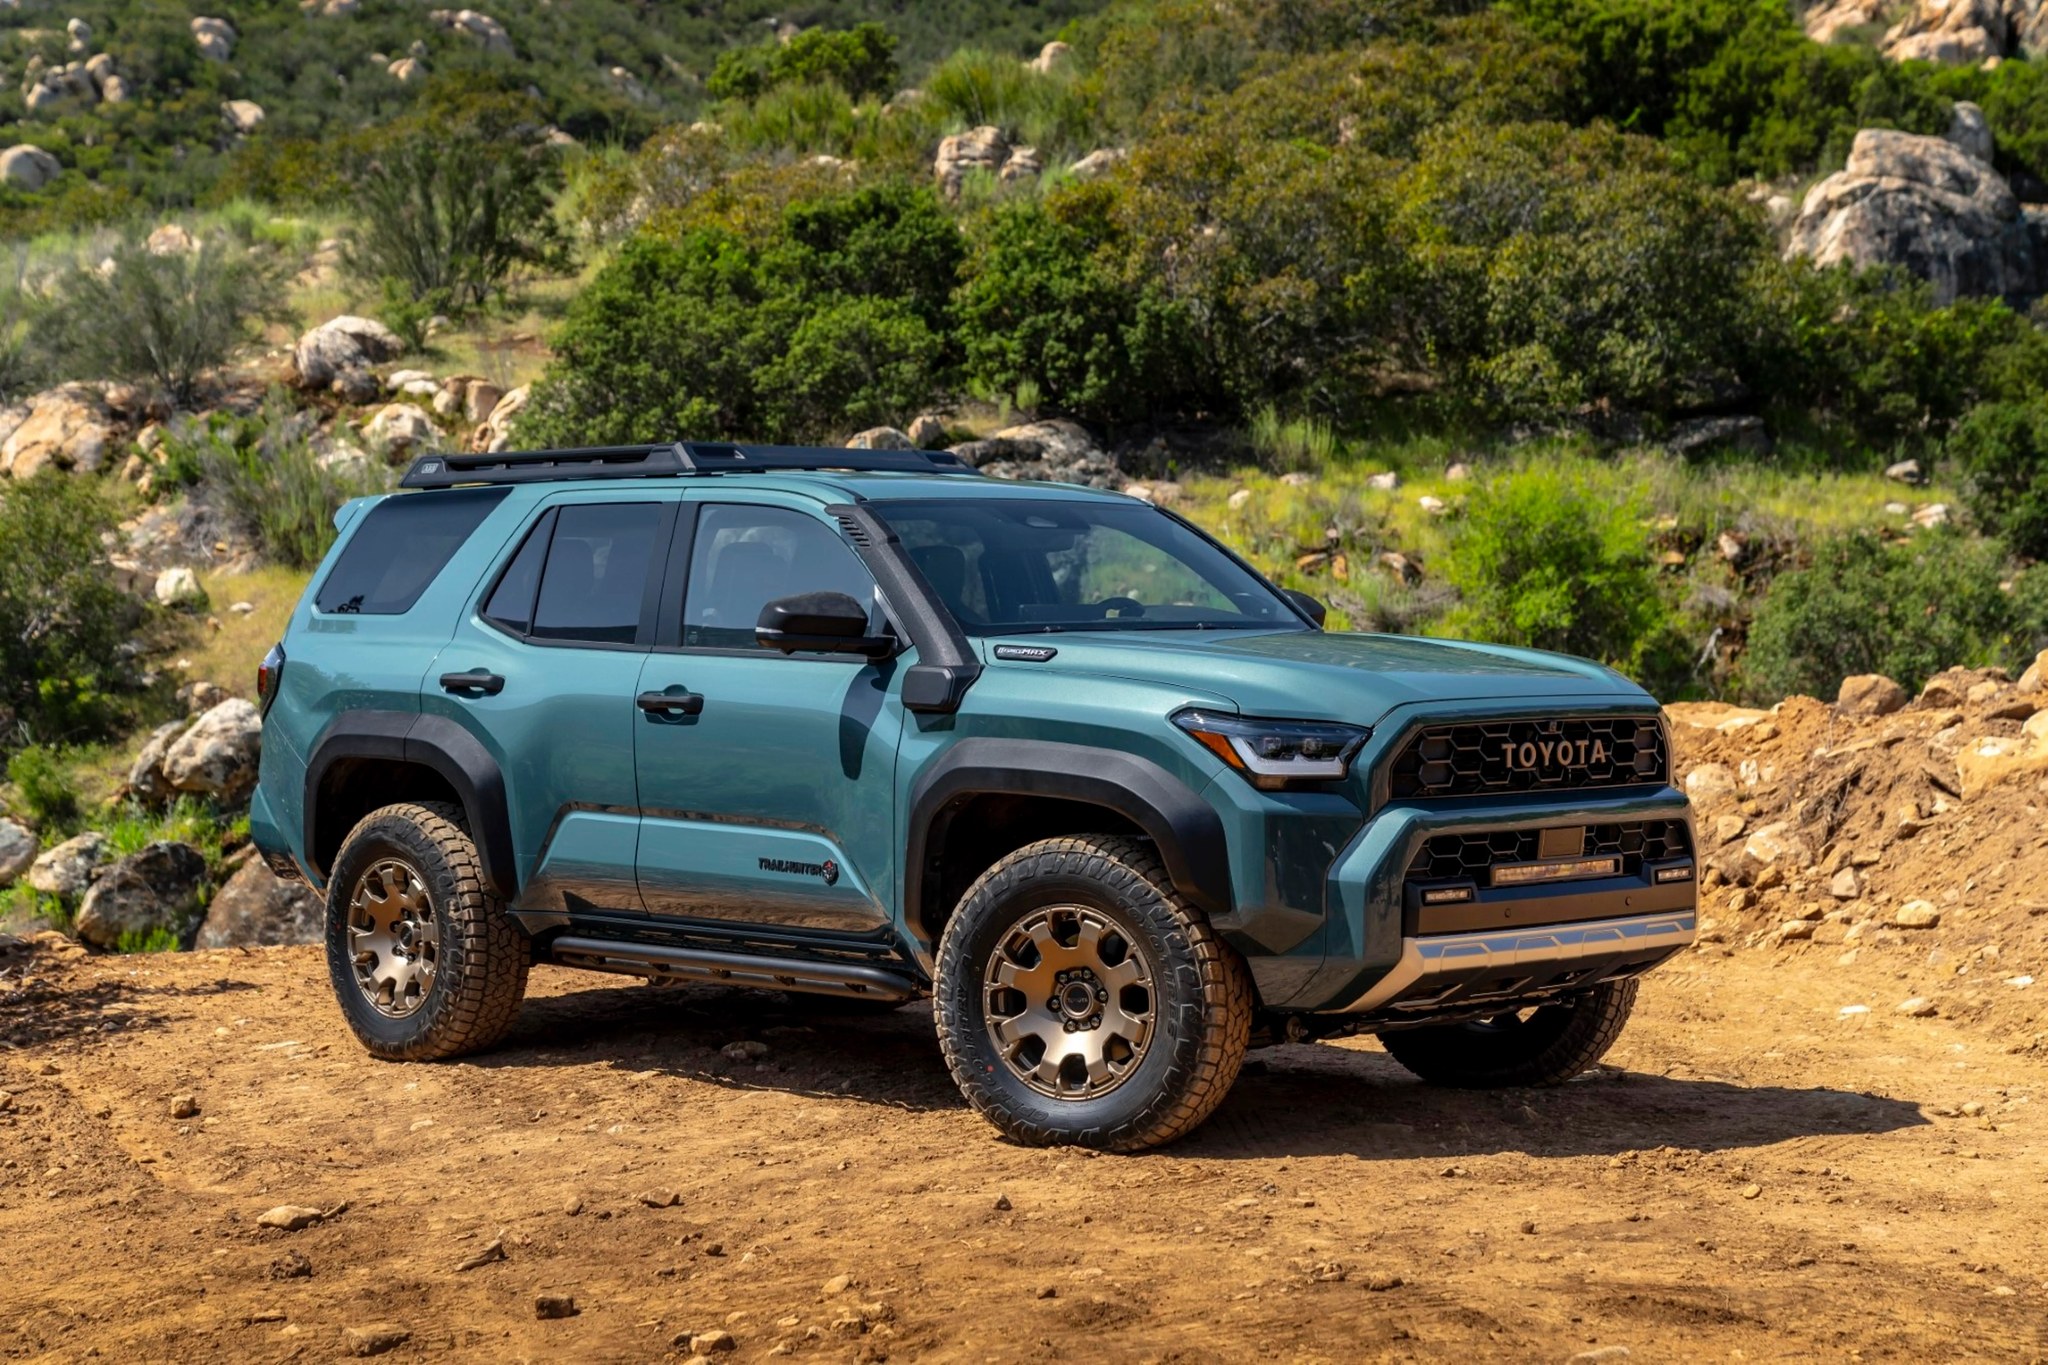 2025 Toyota 4runner 2025 4Runner Photos & Specs! 🔥 Trailhunter, TRD Pro, Off-Road, Limited Trims 2025-toyota-4runner-wallpapers-13-